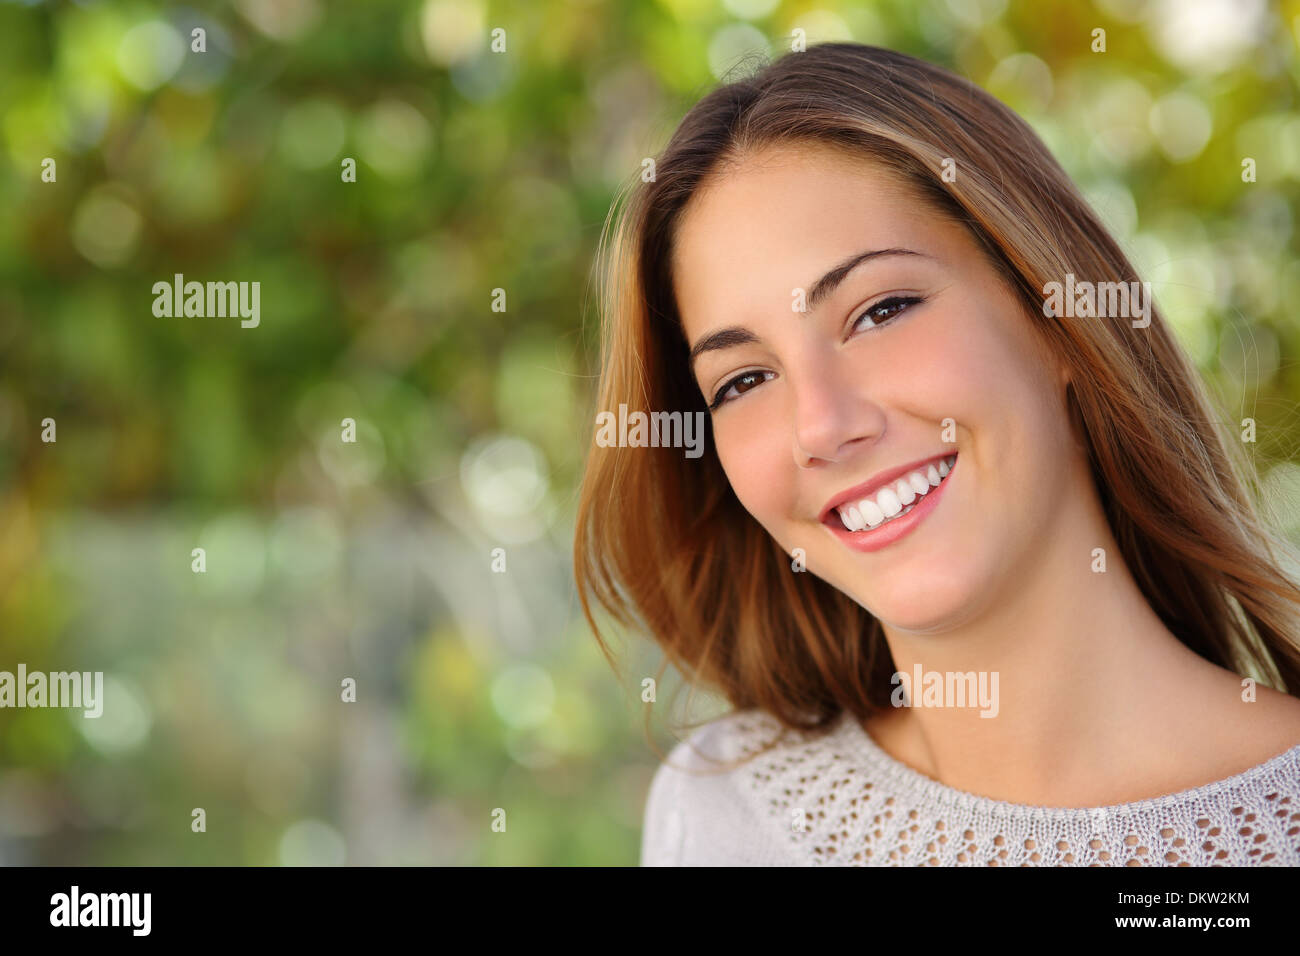 Beautiful woman facial with a perfect white smile outdoor with a green background Stock Photo